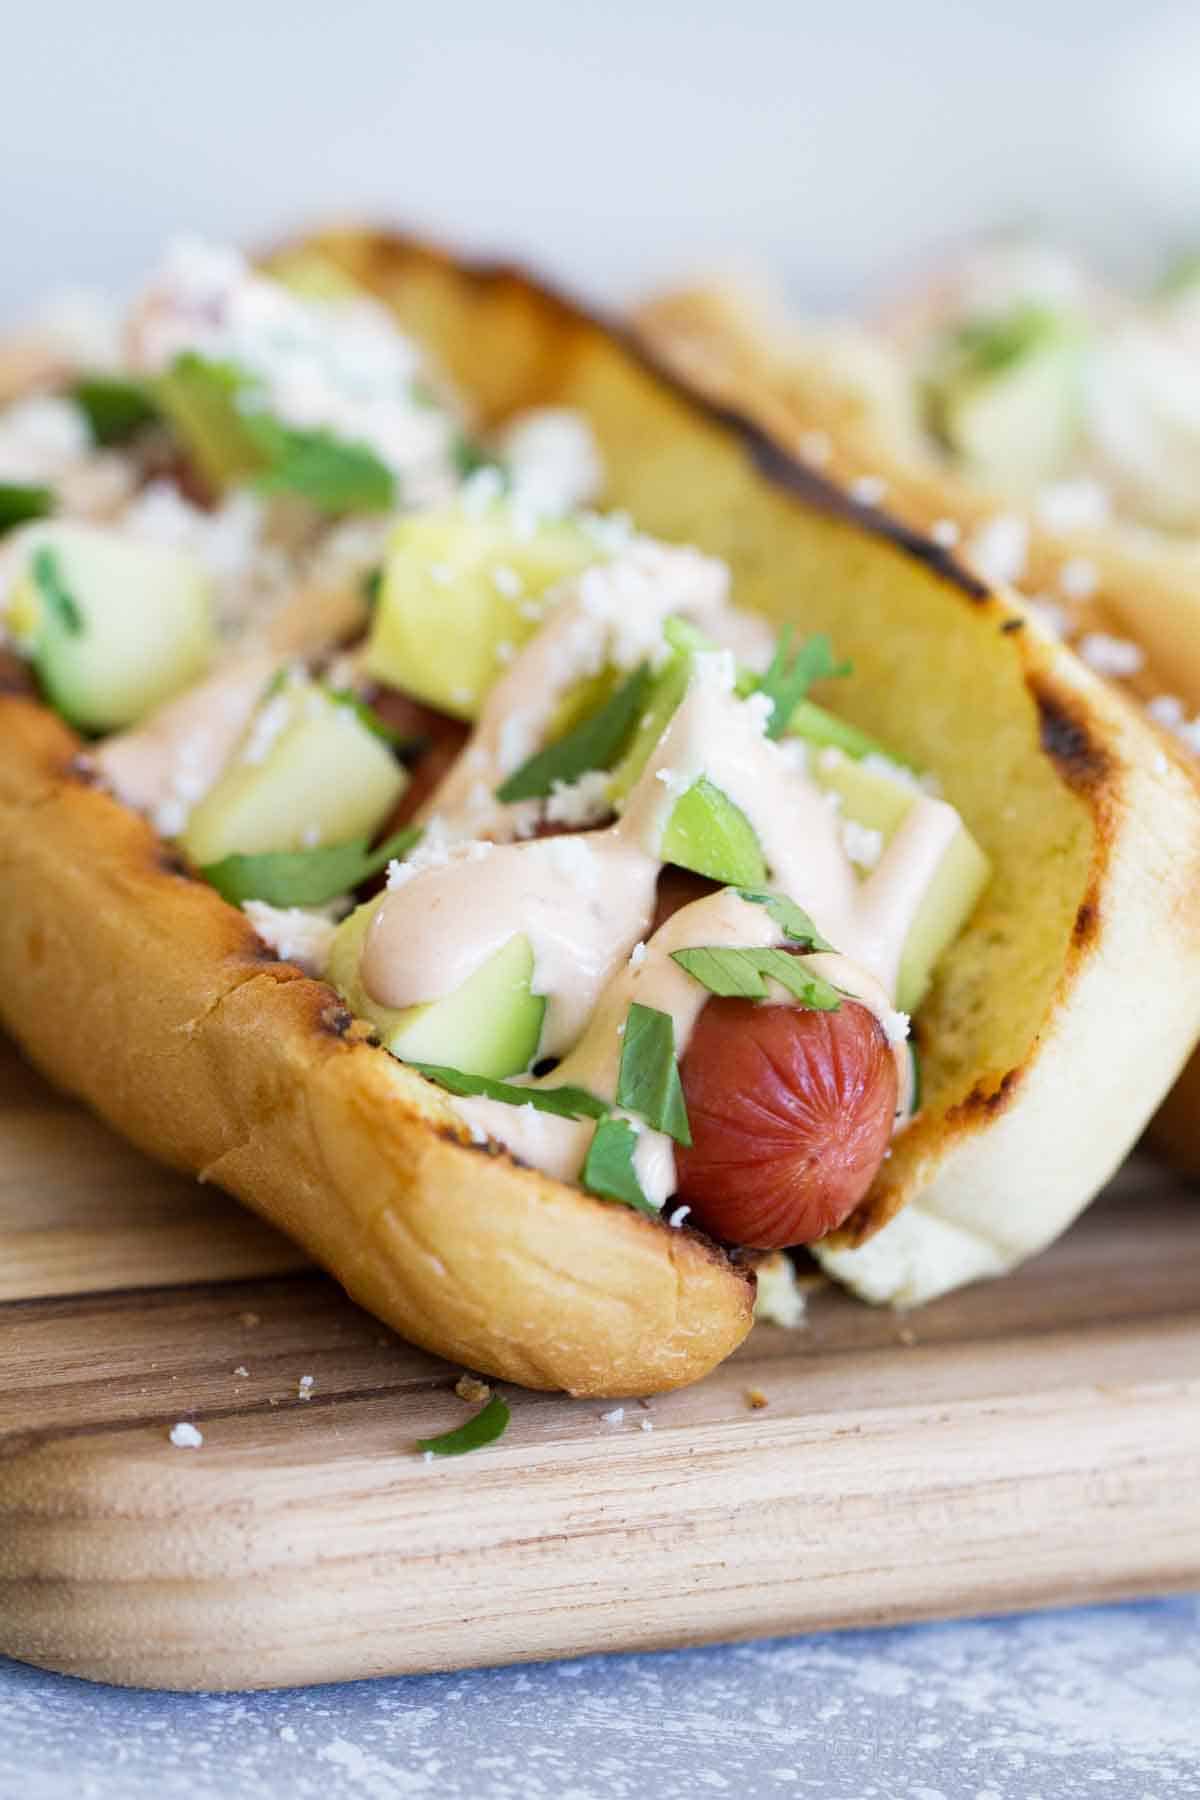 Mexican Hot Dog Recipe - hot dog topped with Mexican inspired toppings